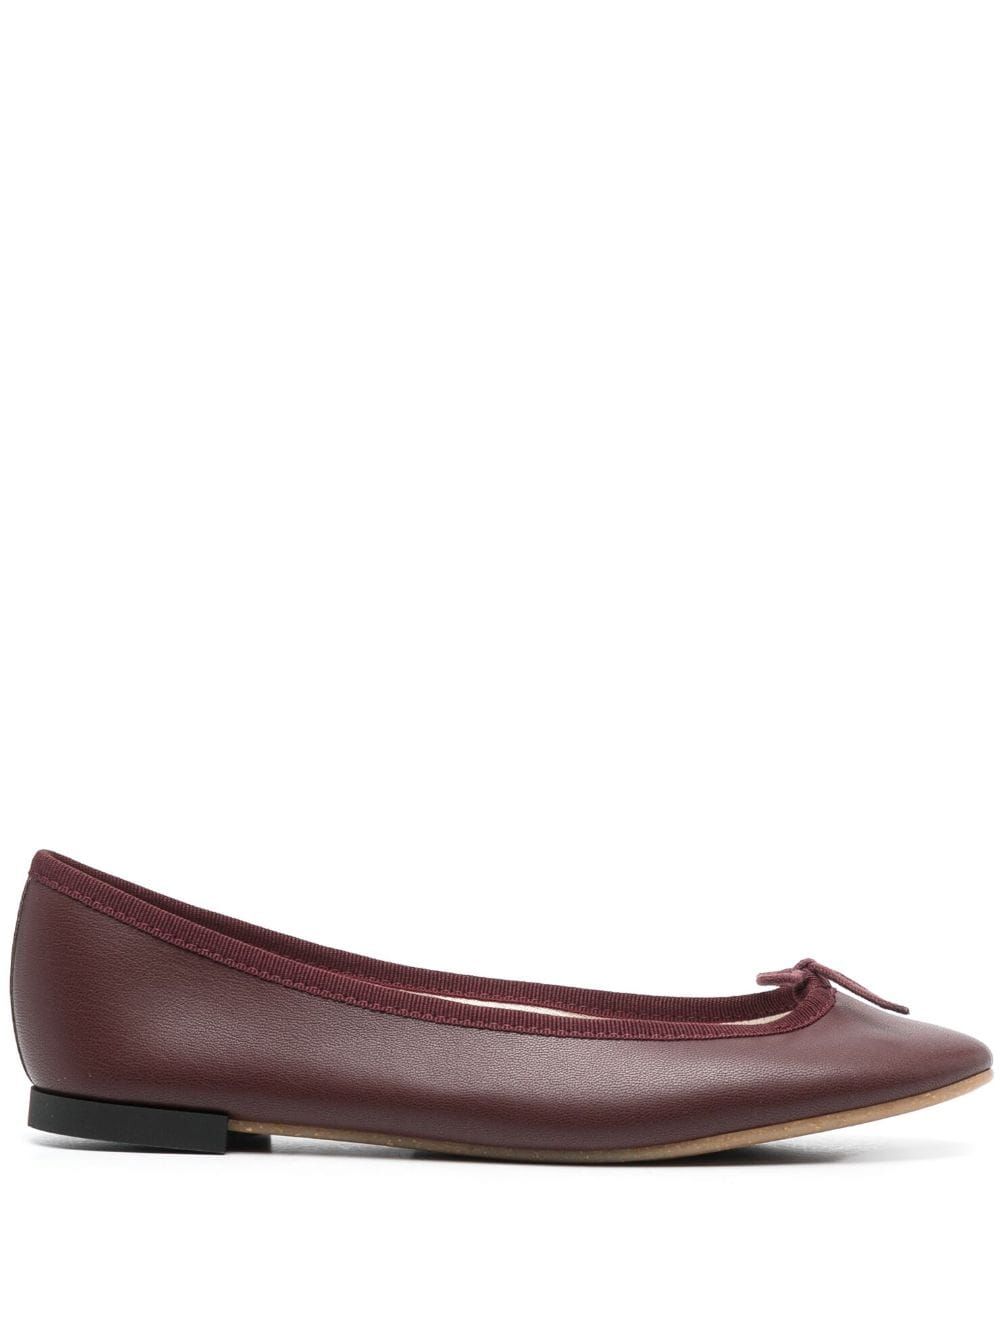 Repetto bow-detail Leather Ballerina Shoes - Farfetch | Farfetch Global